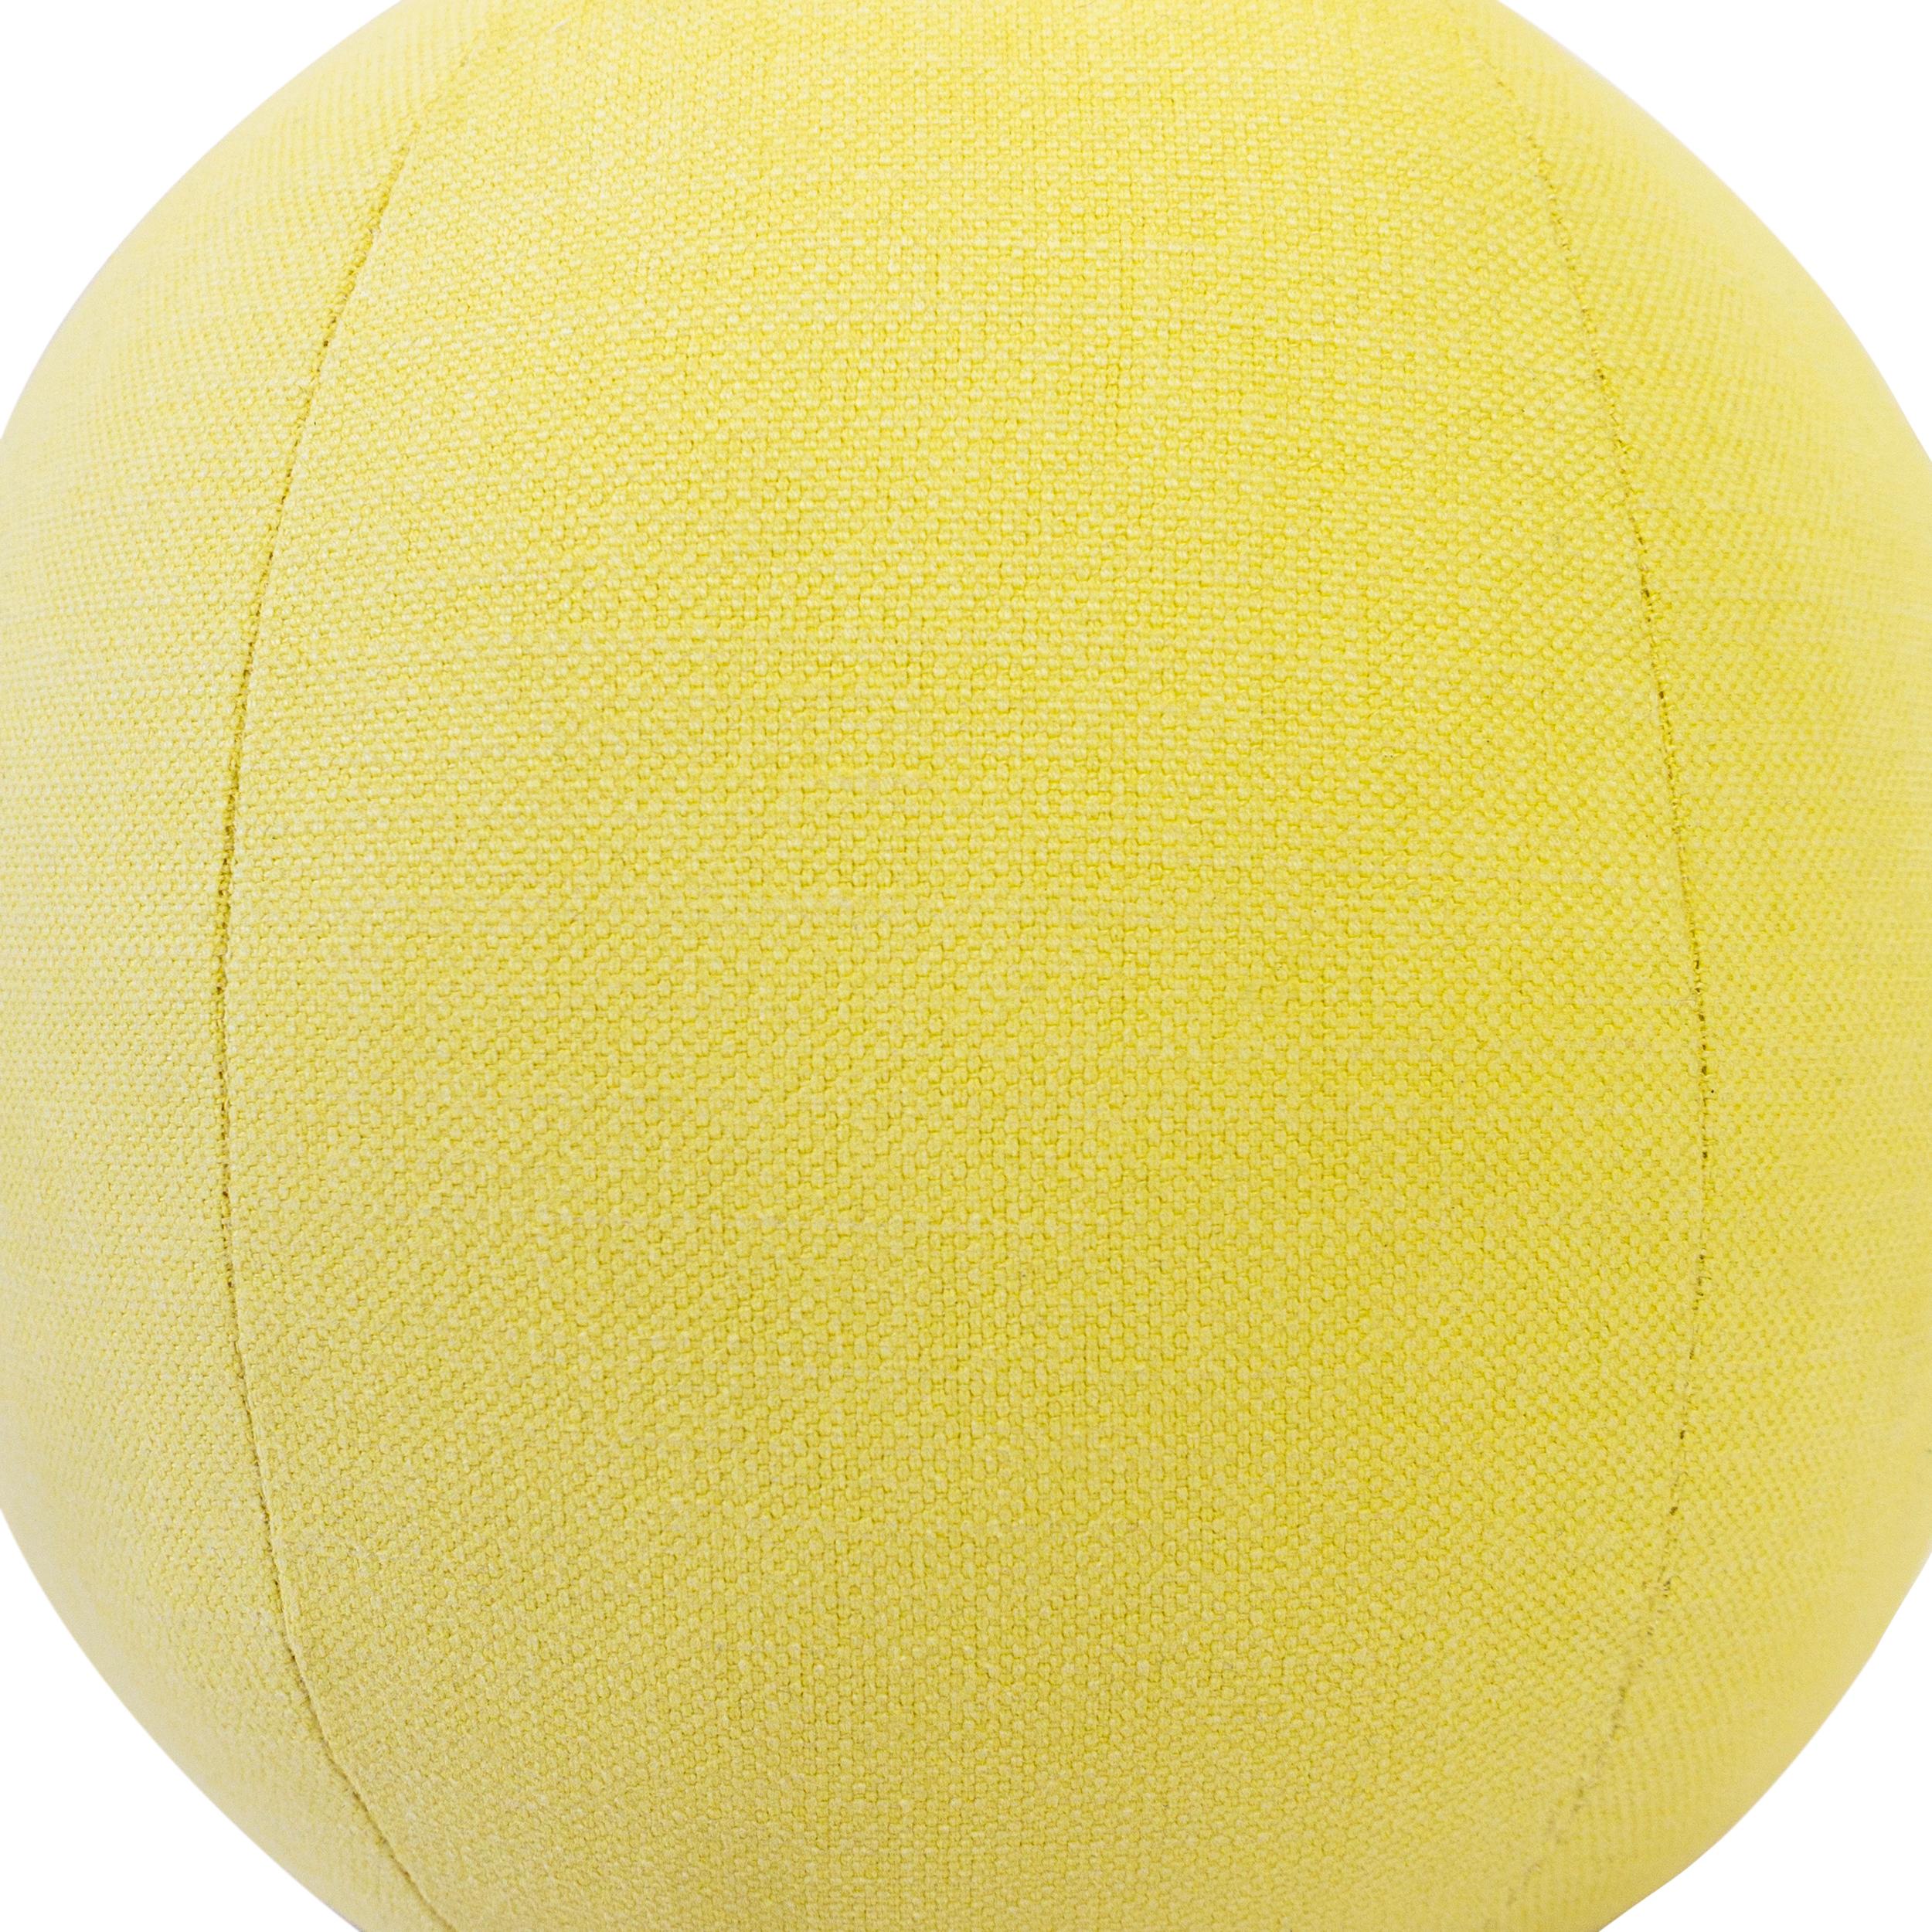 Handmade in Norwalk CT. This linen cotton blend is washable and comes in many dozens of colors, just ask!

Measurements:
Overall: 12” W x 12” H
Disclaimer: Due to their handcrafted nature, the final size and shape of our Ball Pillows may vary